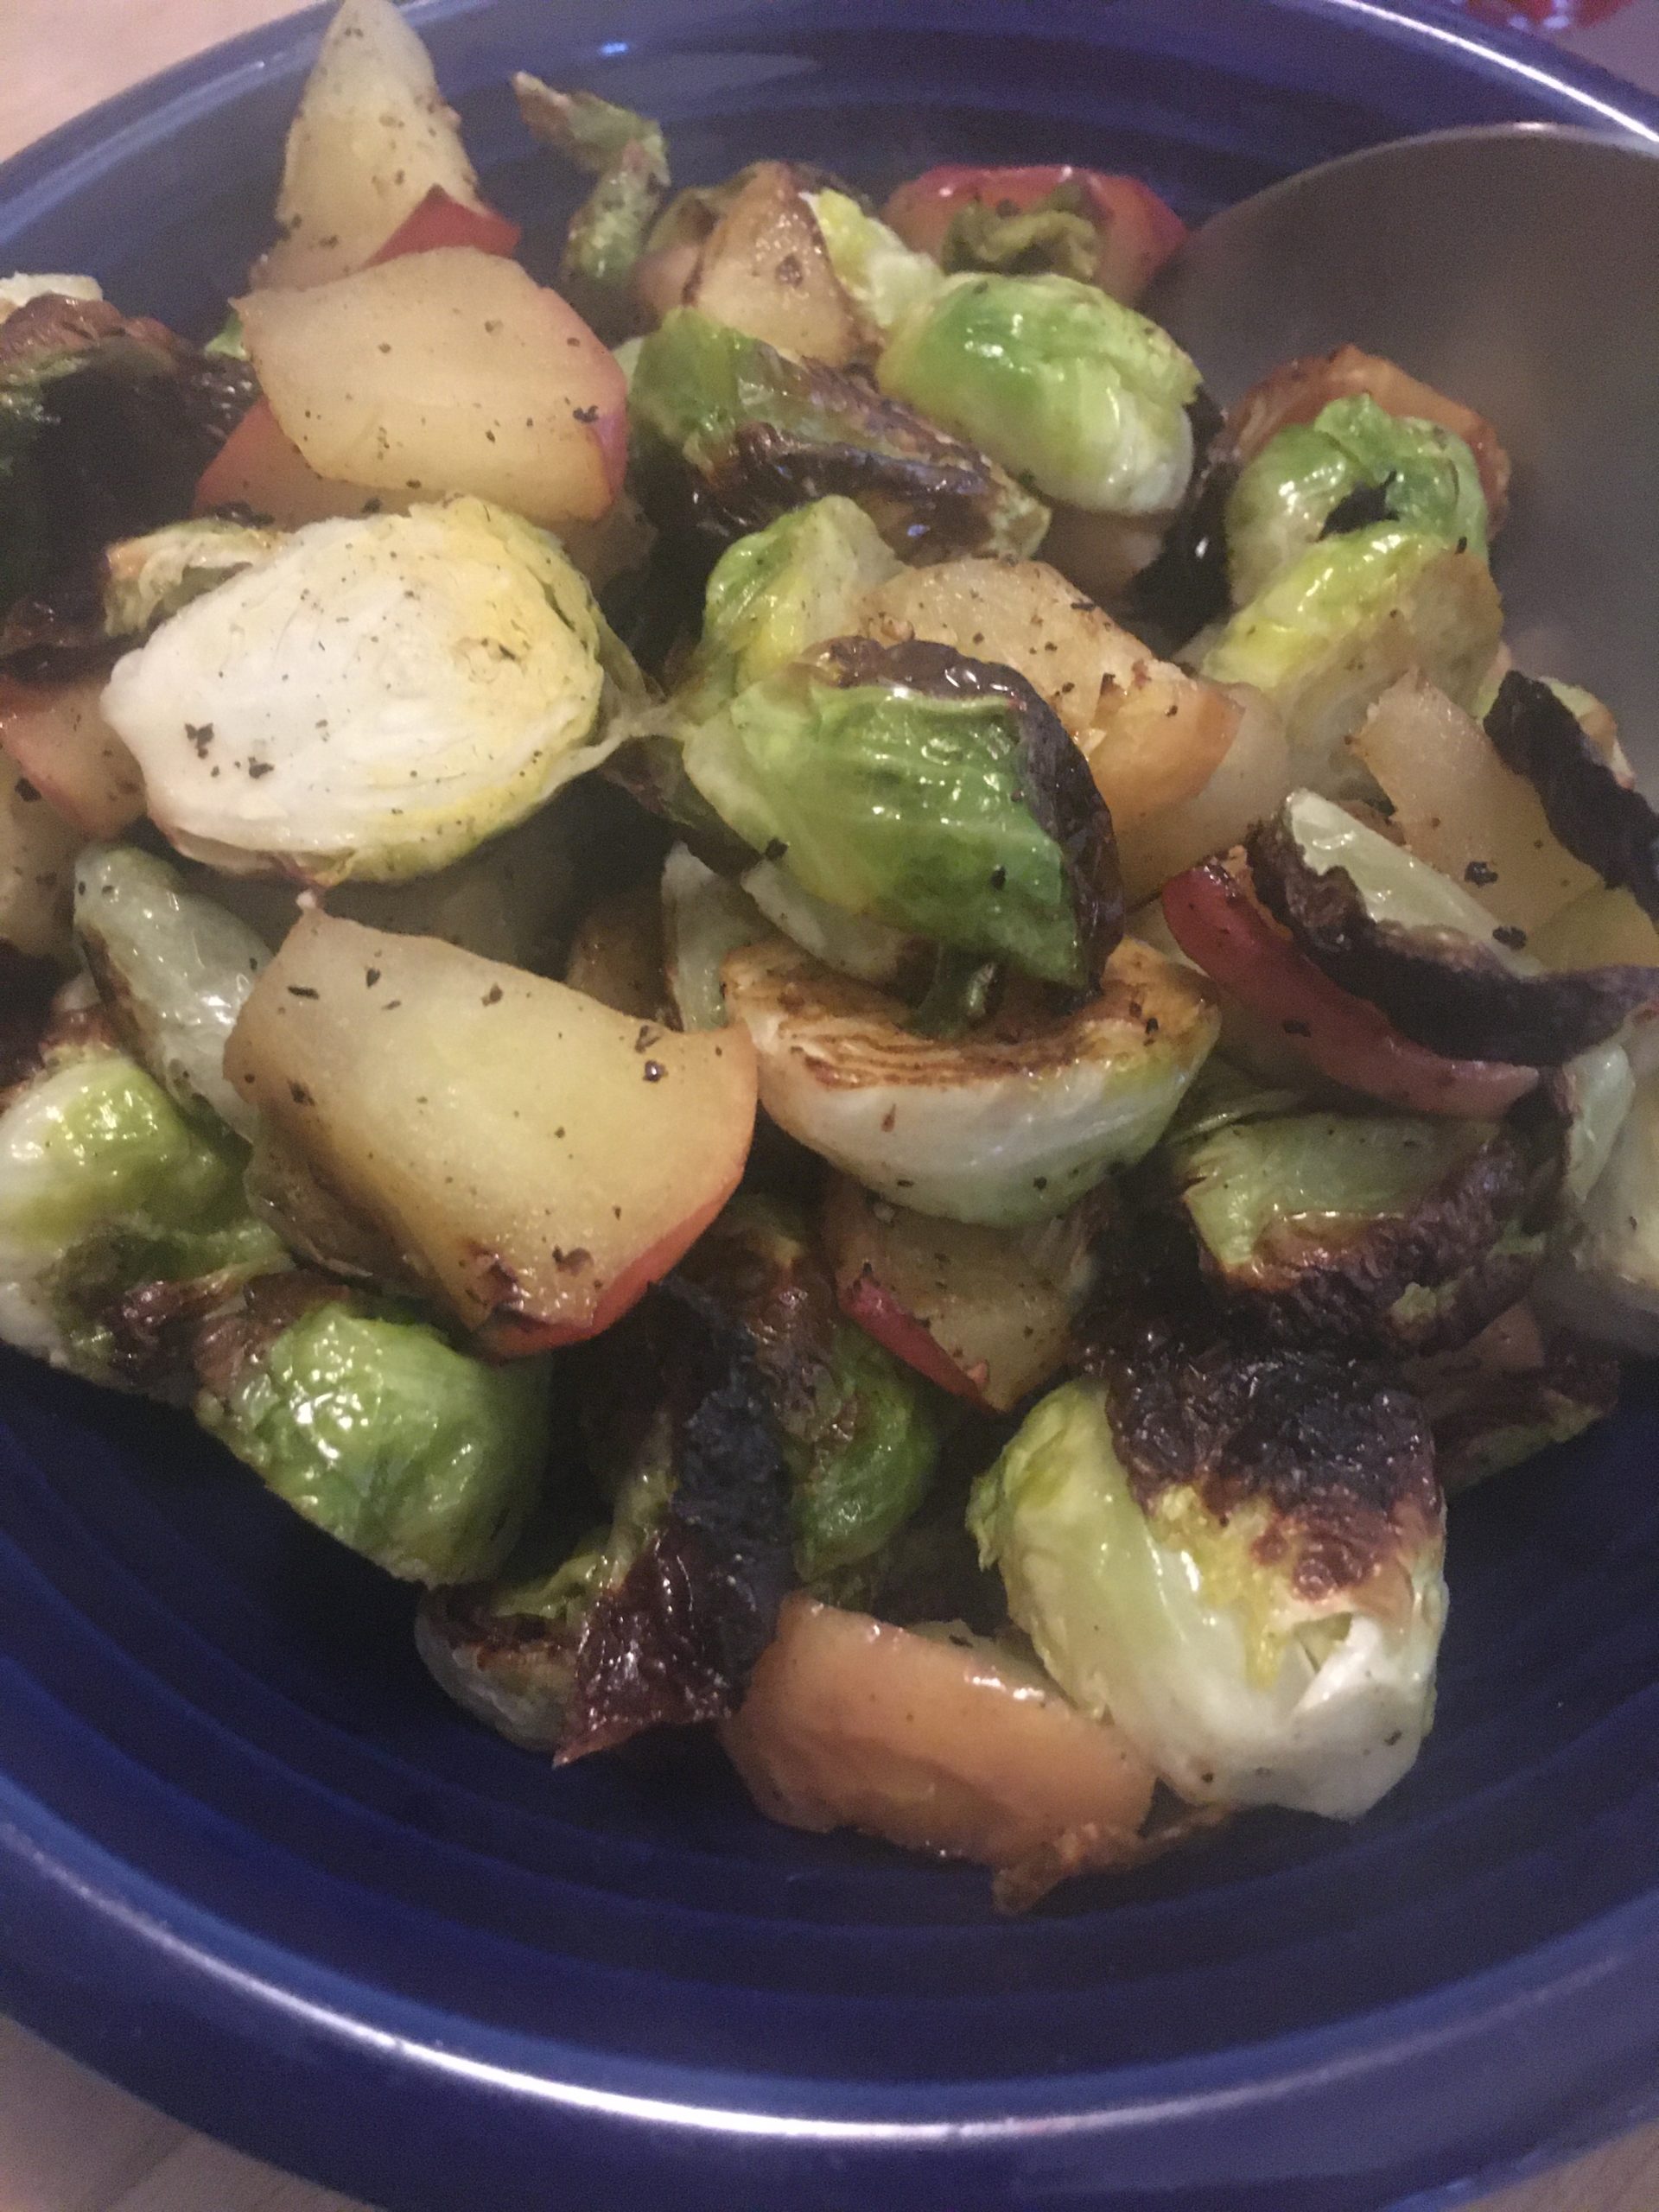 roasted brussel sprouts ready for eating!